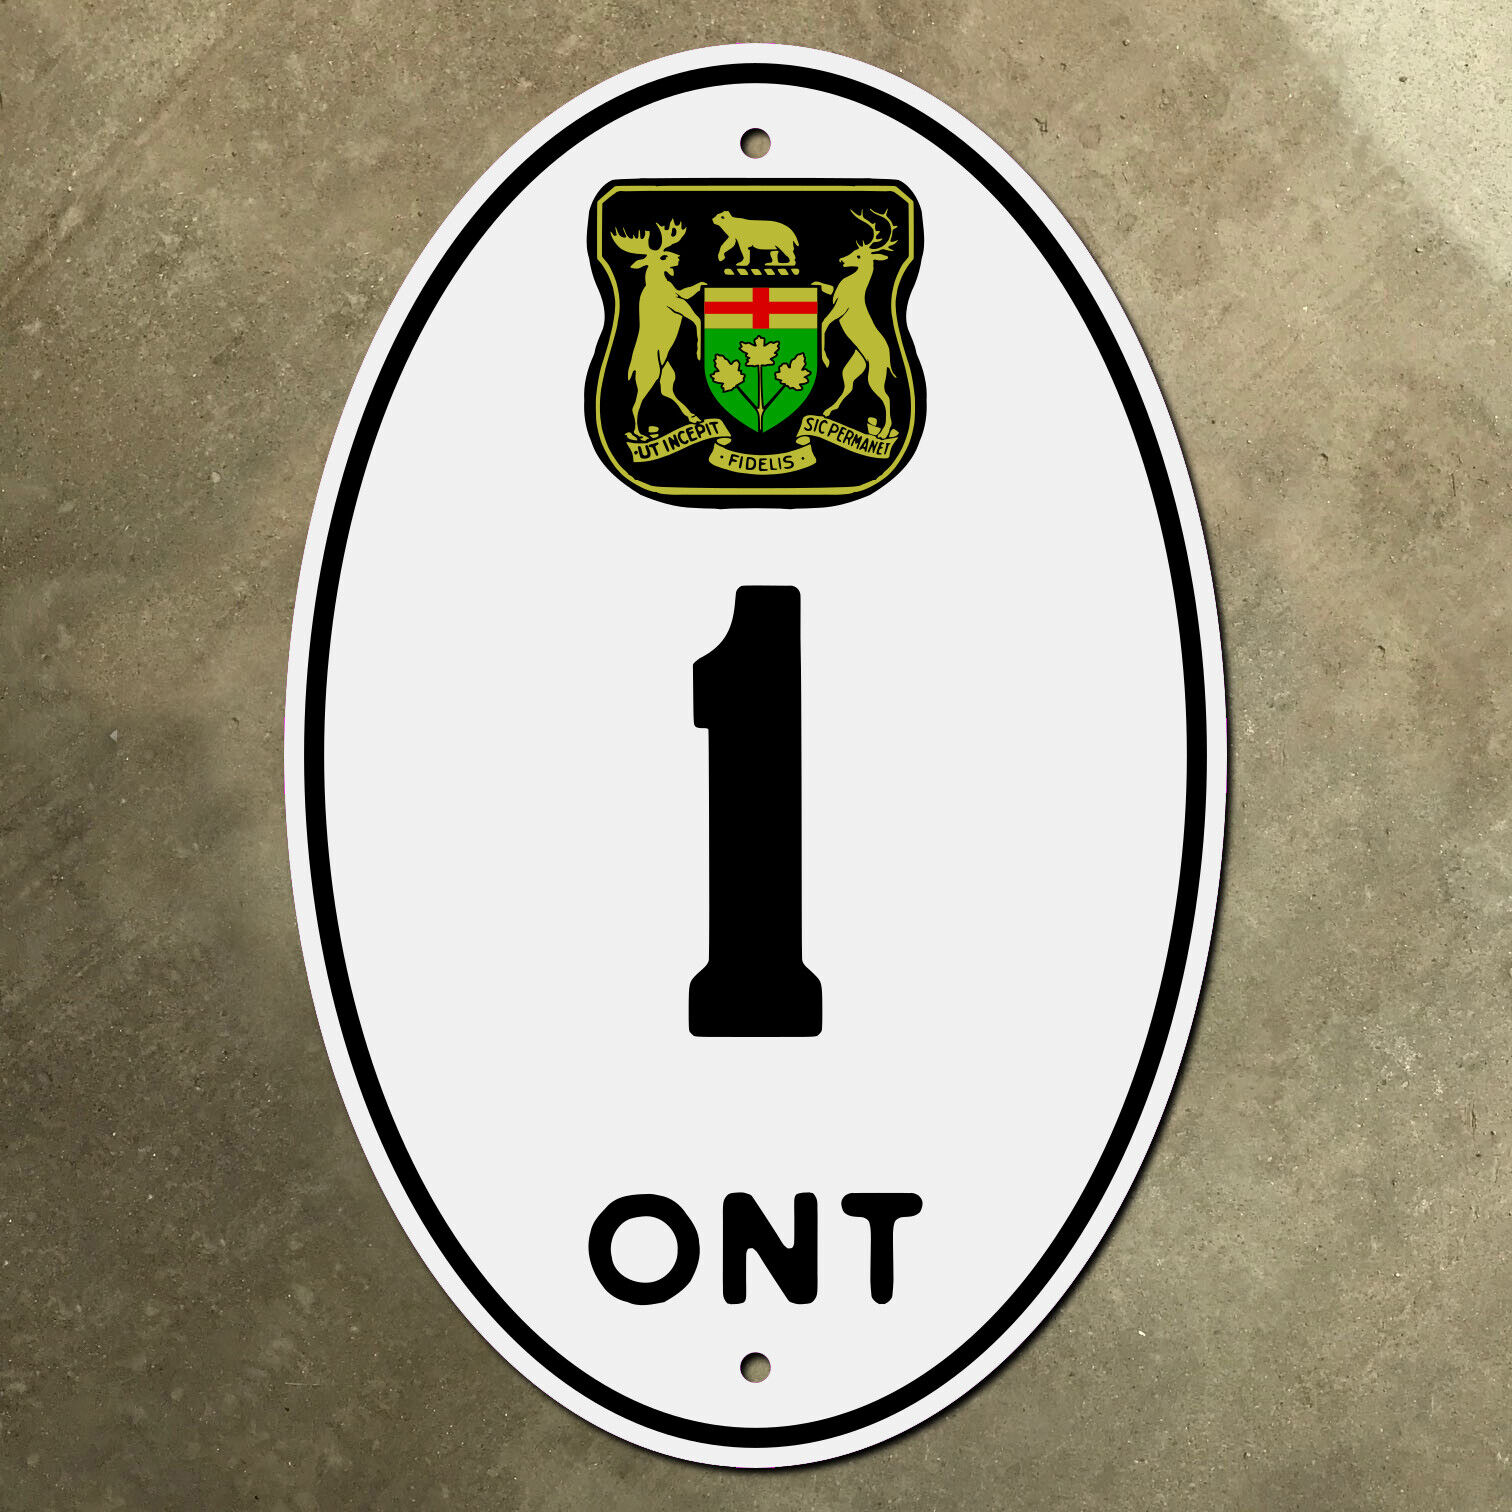 Ontario northern development highway 1 route marker road sign Canada crest 1932